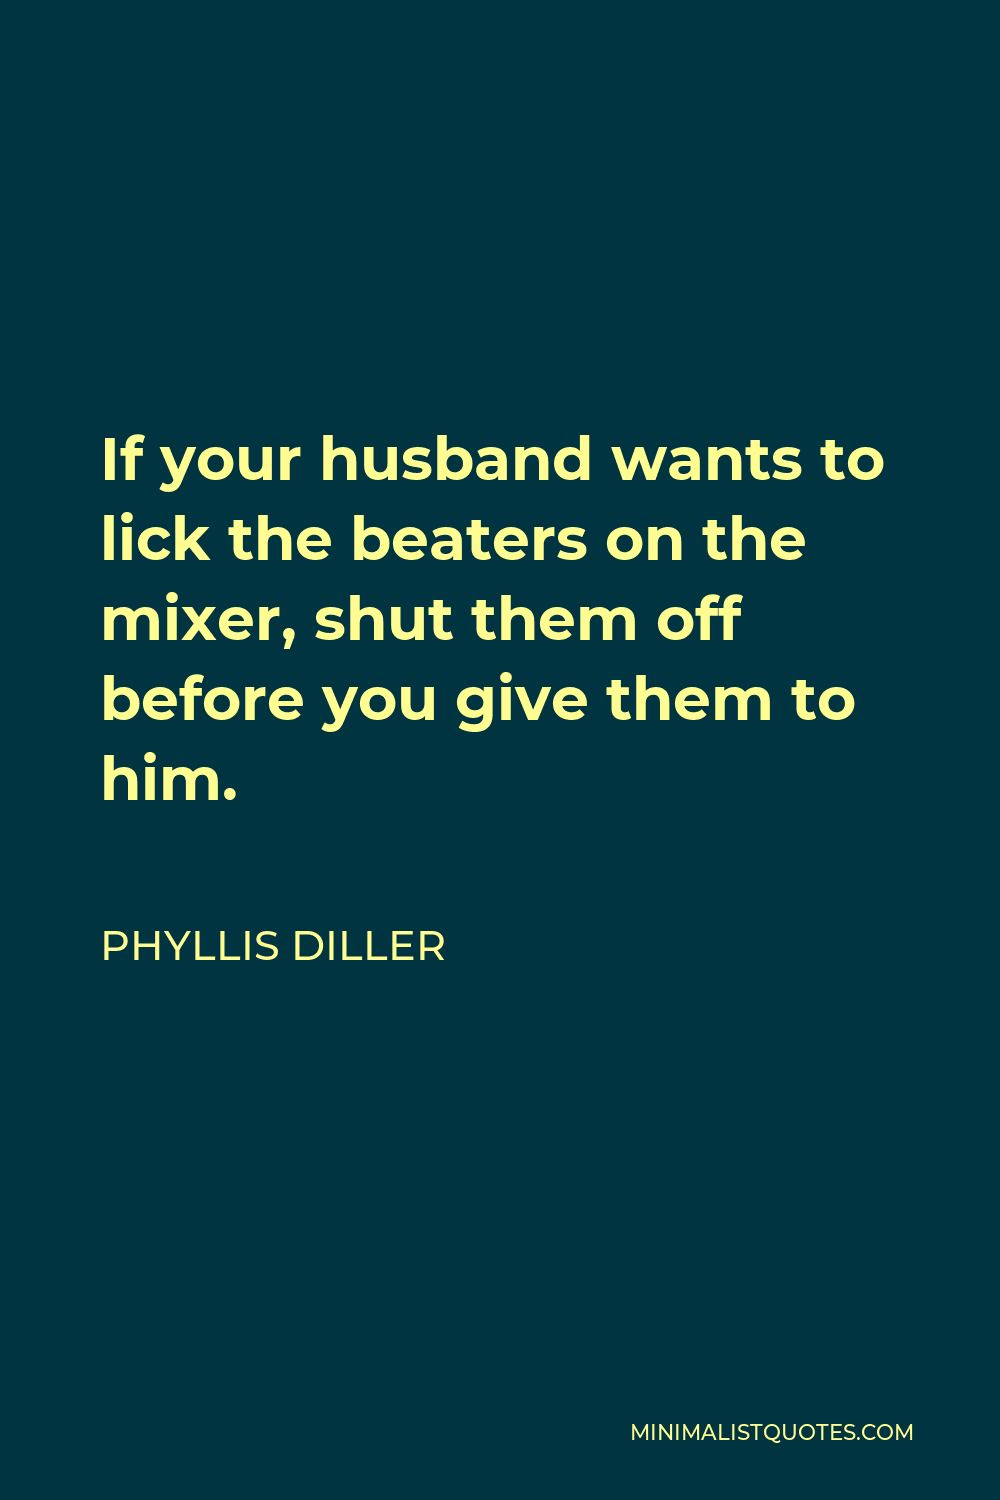 Phyllis Diller Quote - If your husband wants to lick the beaters on the mixer, shut them off before you give them to him.